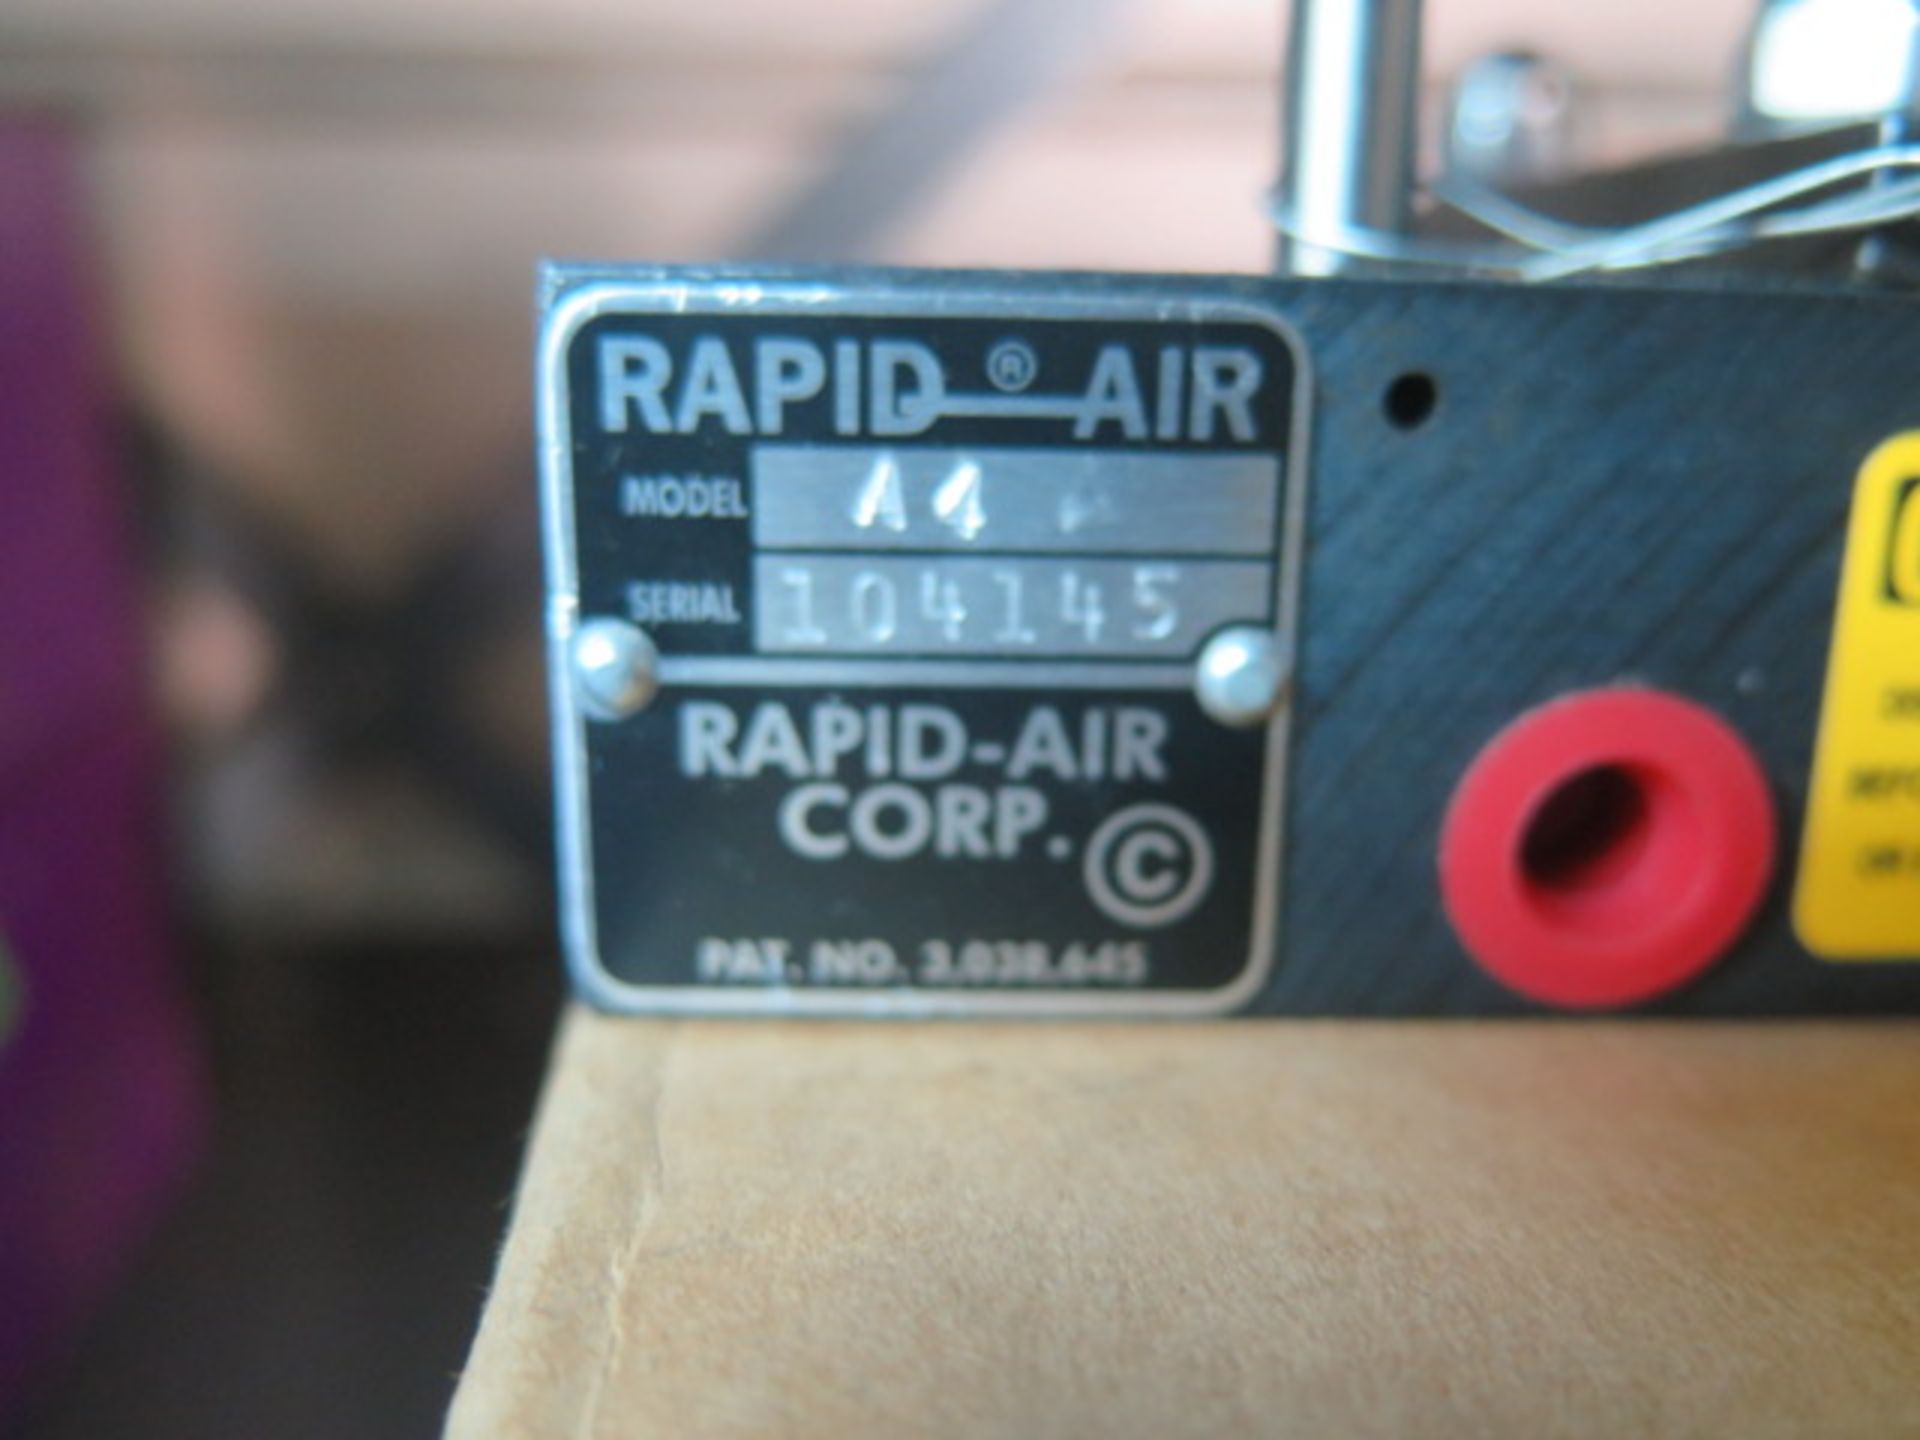 Rapid-Air mdl. A4 1.5" x 4" Air Feeder s/n 104145 (SOLD AS-IS - NO WARRANTY) - Image 5 of 5